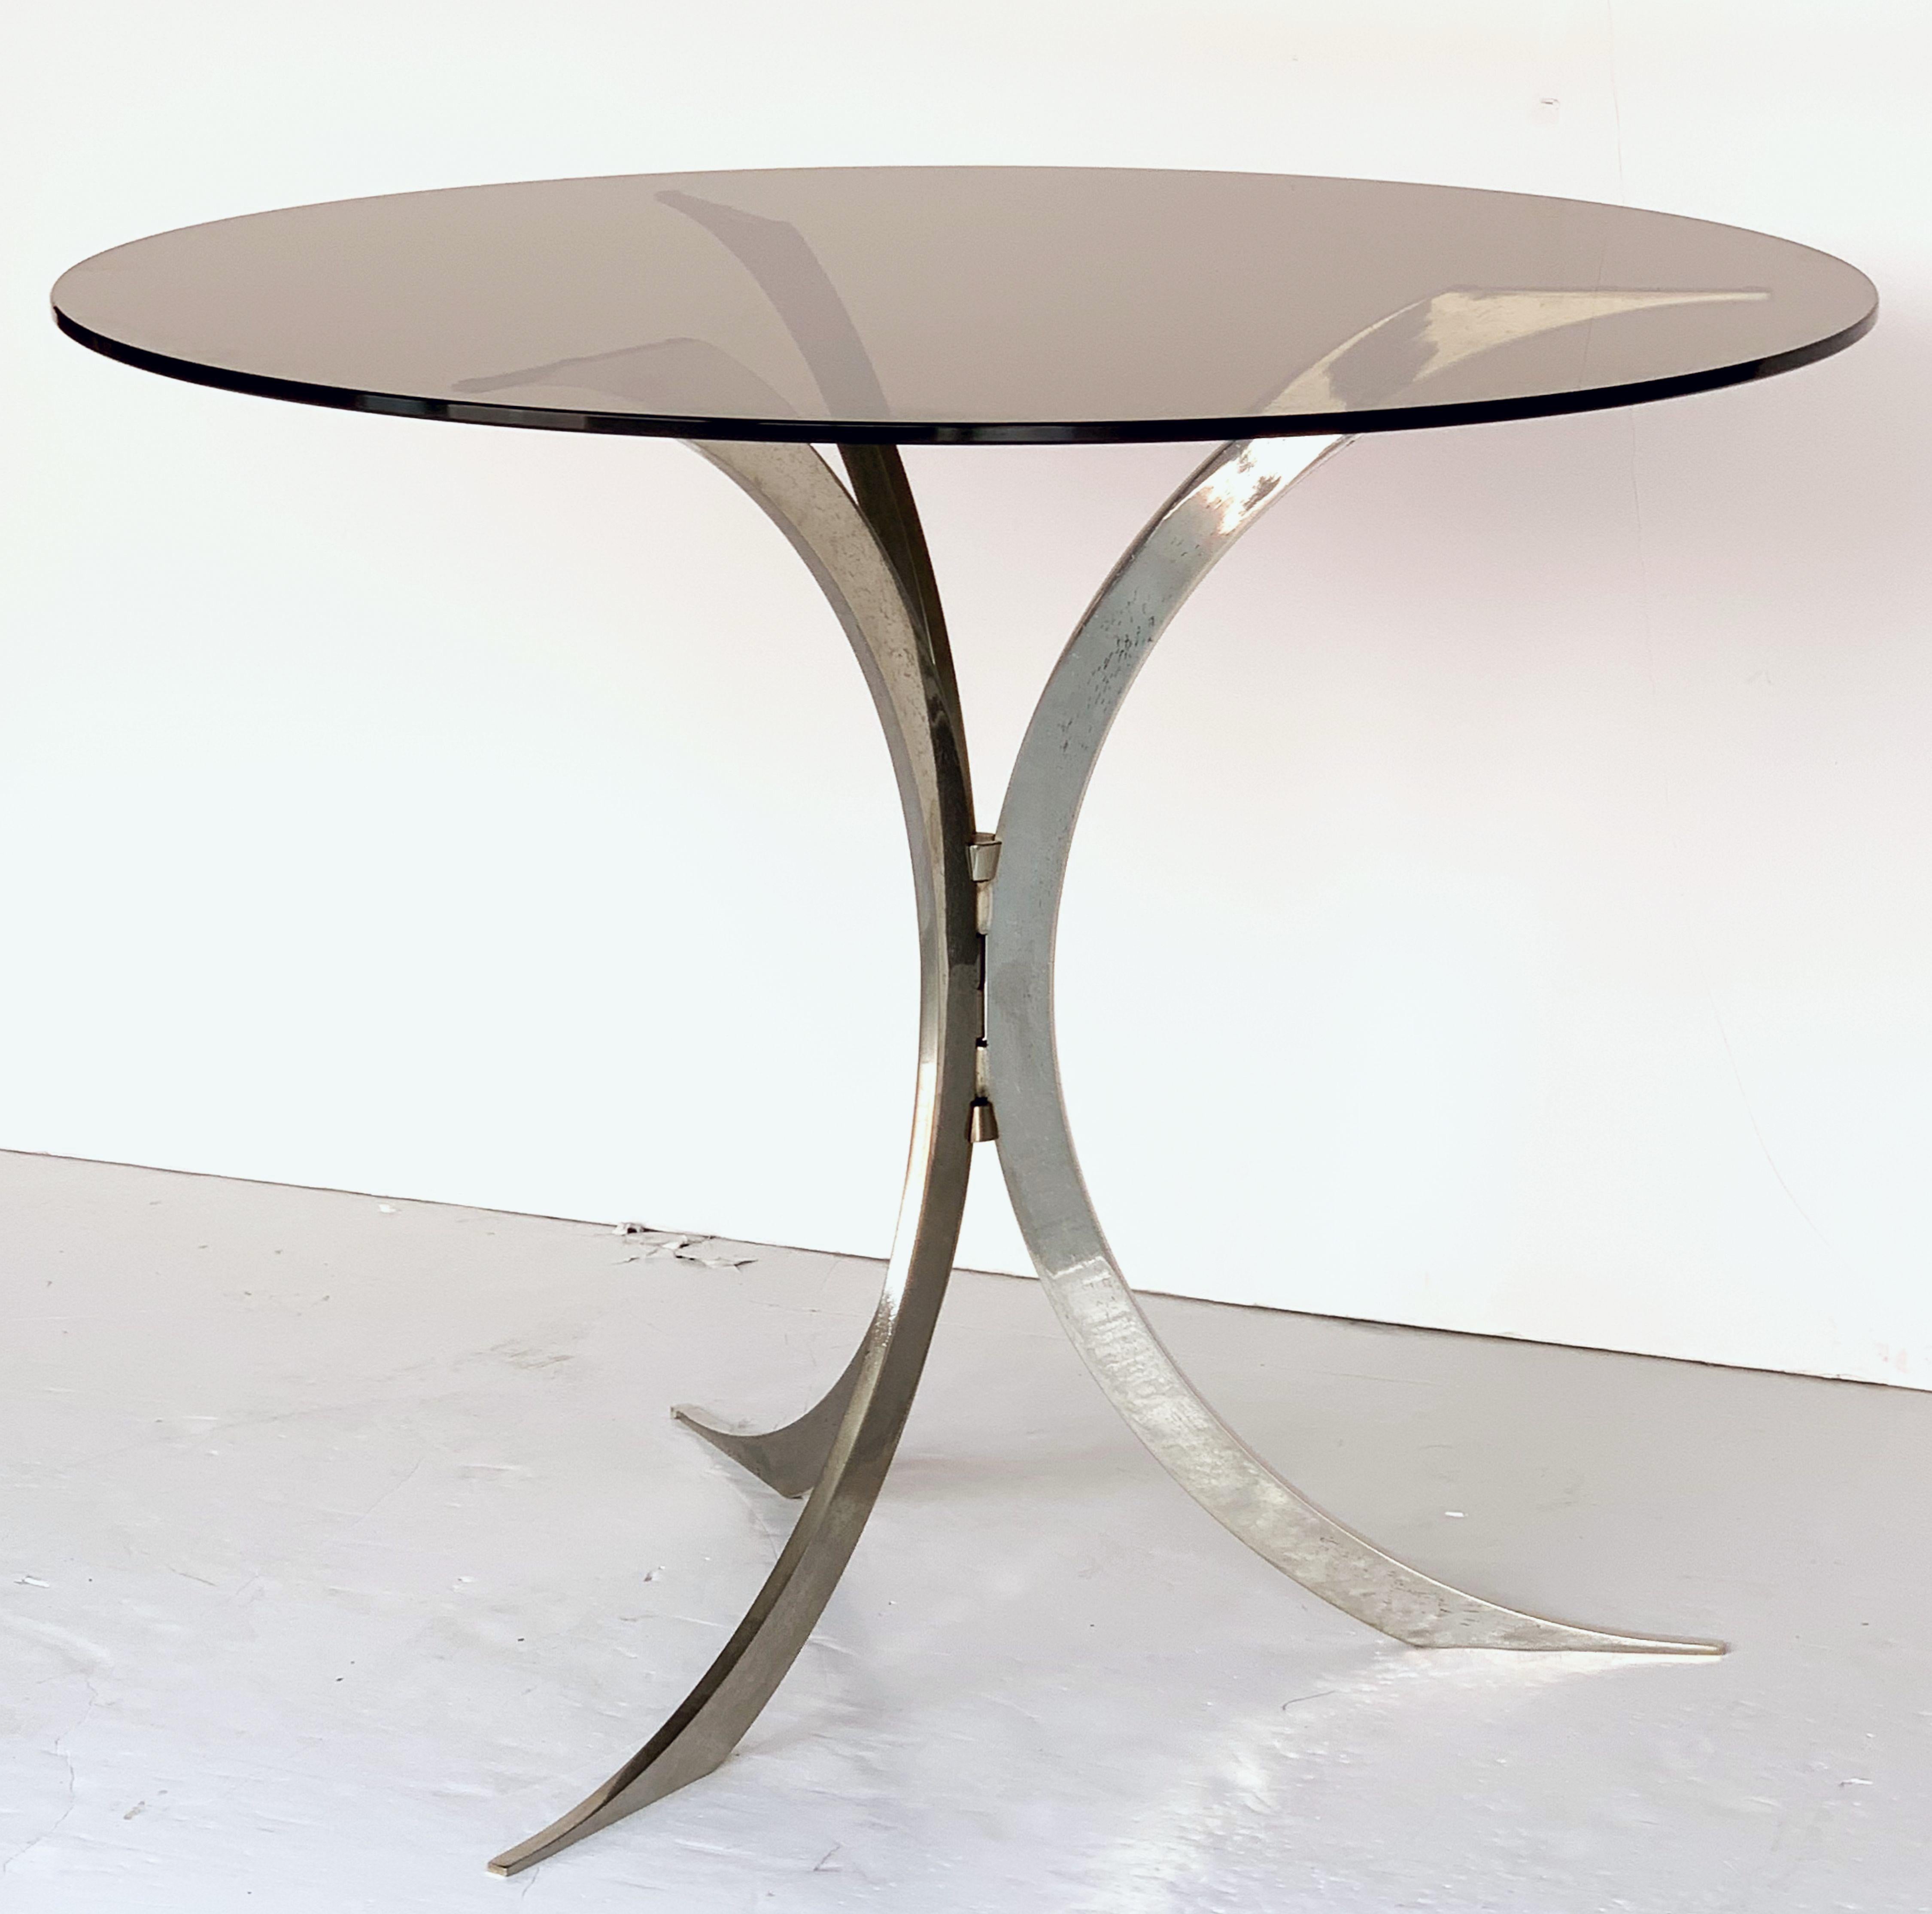 English Round Occasional Table of Chrome Metal with Smoked Glass Top from England